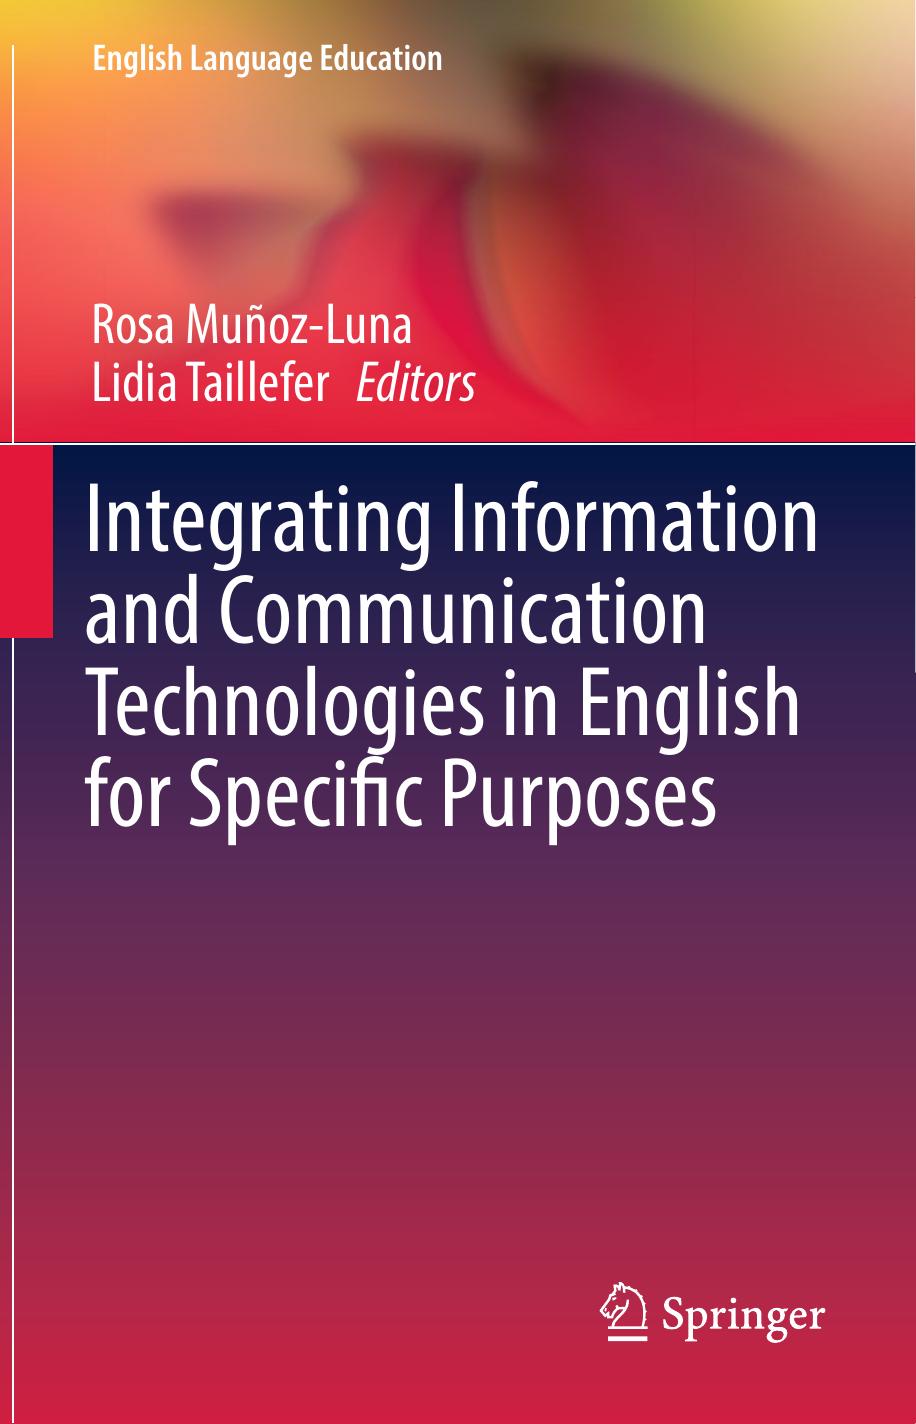 Integrating Information and Communication Technologies in English for Specific Purposes 2018